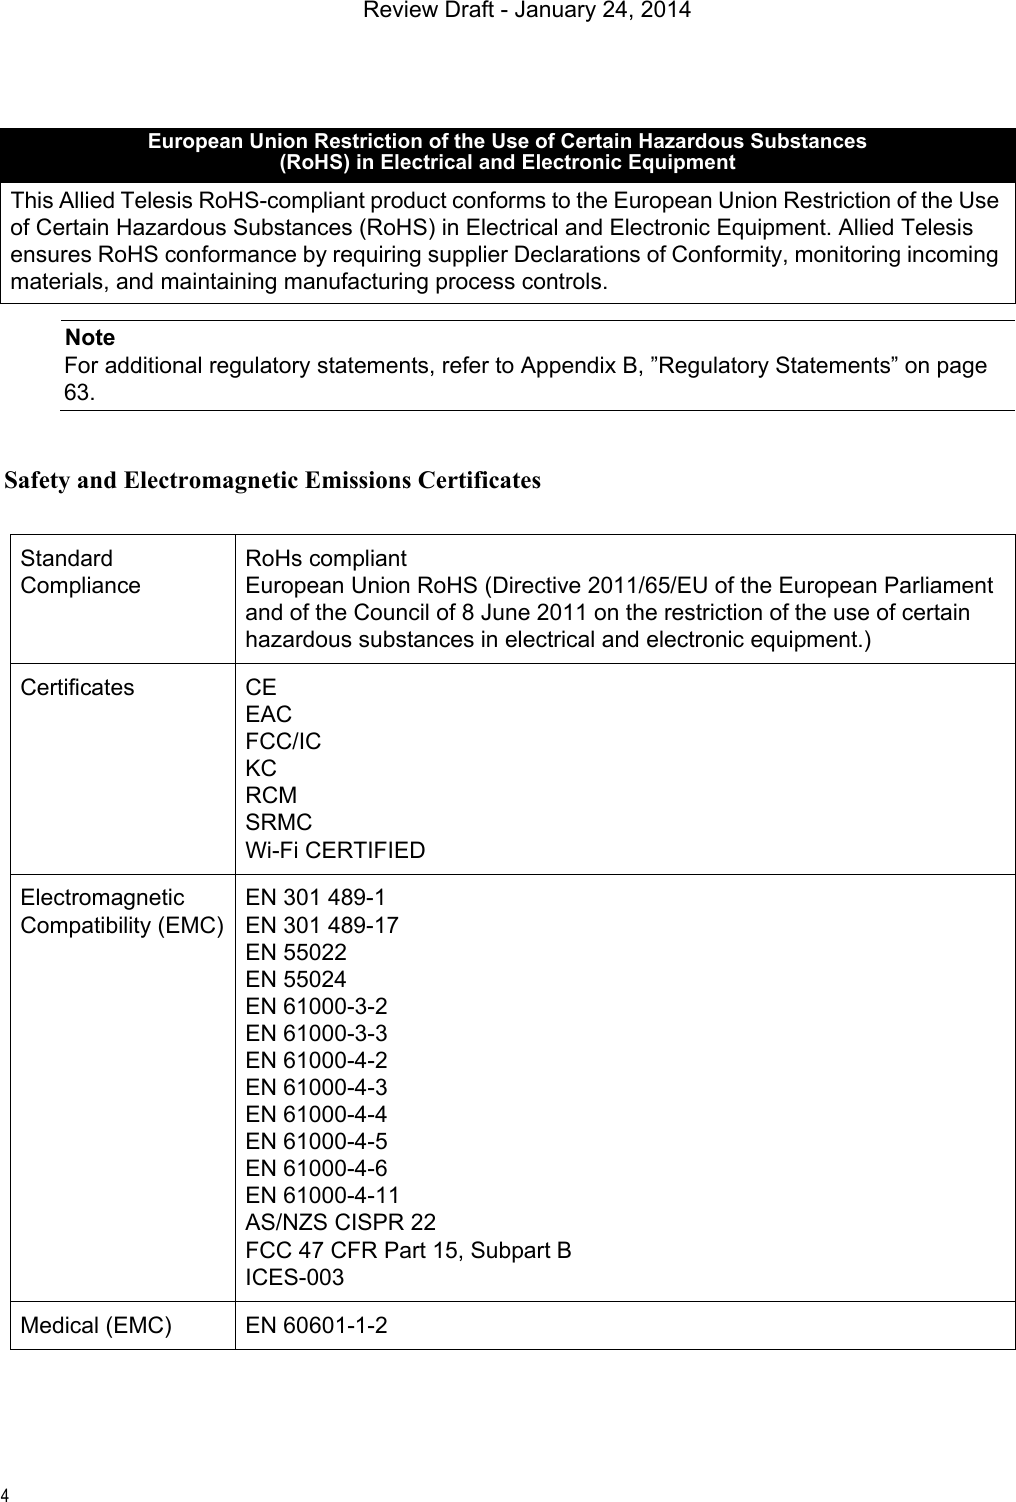 4NoteFor additional regulatory statements, refer to Appendix B, ”Regulatory Statements” on page 63.Safety and Electromagnetic Emissions CertificatesEuropean Union Restriction of the Use of Certain Hazardous Substances(RoHS) in Electrical and Electronic EquipmentThis Allied Telesis RoHS-compliant product conforms to the European Union Restriction of the Use of Certain Hazardous Substances (RoHS) in Electrical and Electronic Equipment. Allied Telesis ensures RoHS conformance by requiring supplier Declarations of Conformity, monitoring incoming materials, and maintaining manufacturing process controls.Standard ComplianceRoHs compliantEuropean Union RoHS (Directive 2011/65/EU of the European Parliament and of the Council of 8 June 2011 on the restriction of the use of certain hazardous substances in electrical and electronic equipment.)Certificates CEEACFCC/ICKCRCMSRMCWi-Fi CERTIFIEDElectromagnetic Compatibility (EMC)EN 301 489-1EN 301 489-17EN 55022EN 55024EN 61000-3-2EN 61000-3-3EN 61000-4-2EN 61000-4-3EN 61000-4-4EN 61000-4-5EN 61000-4-6EN 61000-4-11AS/NZS CISPR 22FCC 47 CFR Part 15, Subpart BICES-003Medical (EMC) EN 60601-1-2Review Draft - January 24, 2014